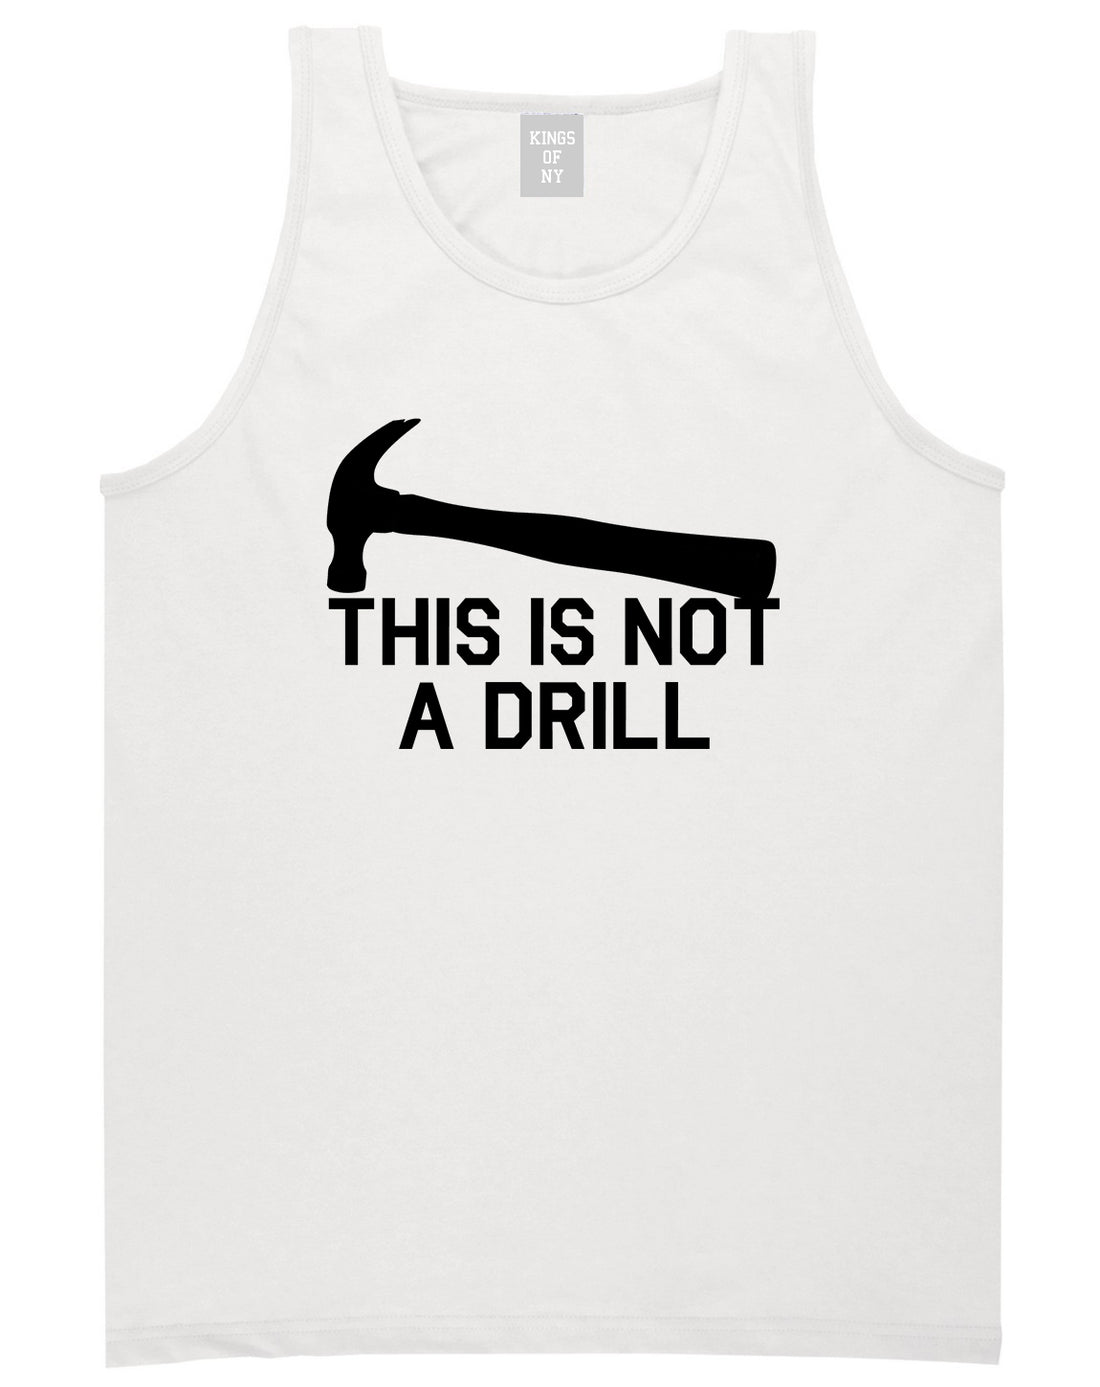 This Is Not A Drill Funny Construction Worker Mens Tank Top T-Shirt White